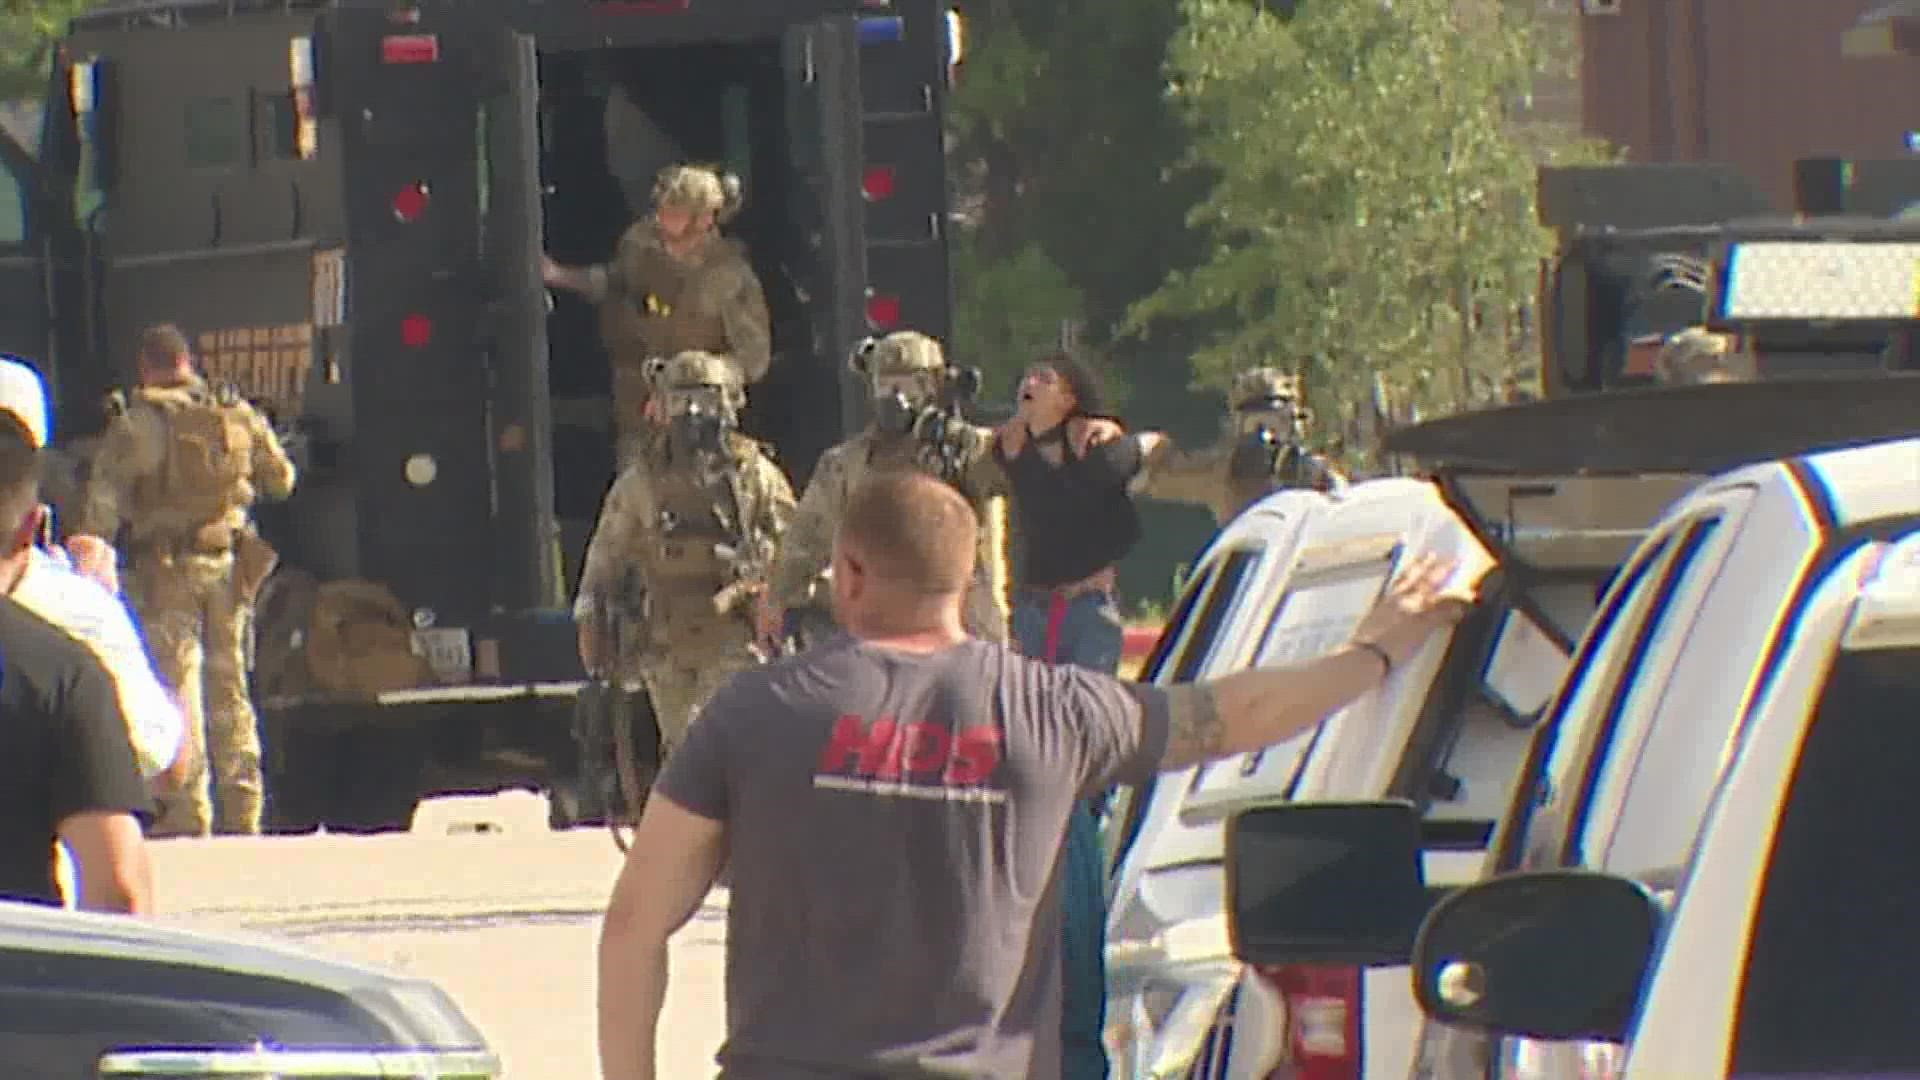 SWAT sent in a robot around 7 a.m. that spotted the suspect still inside a warehouse located behind a motel off FM 529. They later used tear gas.